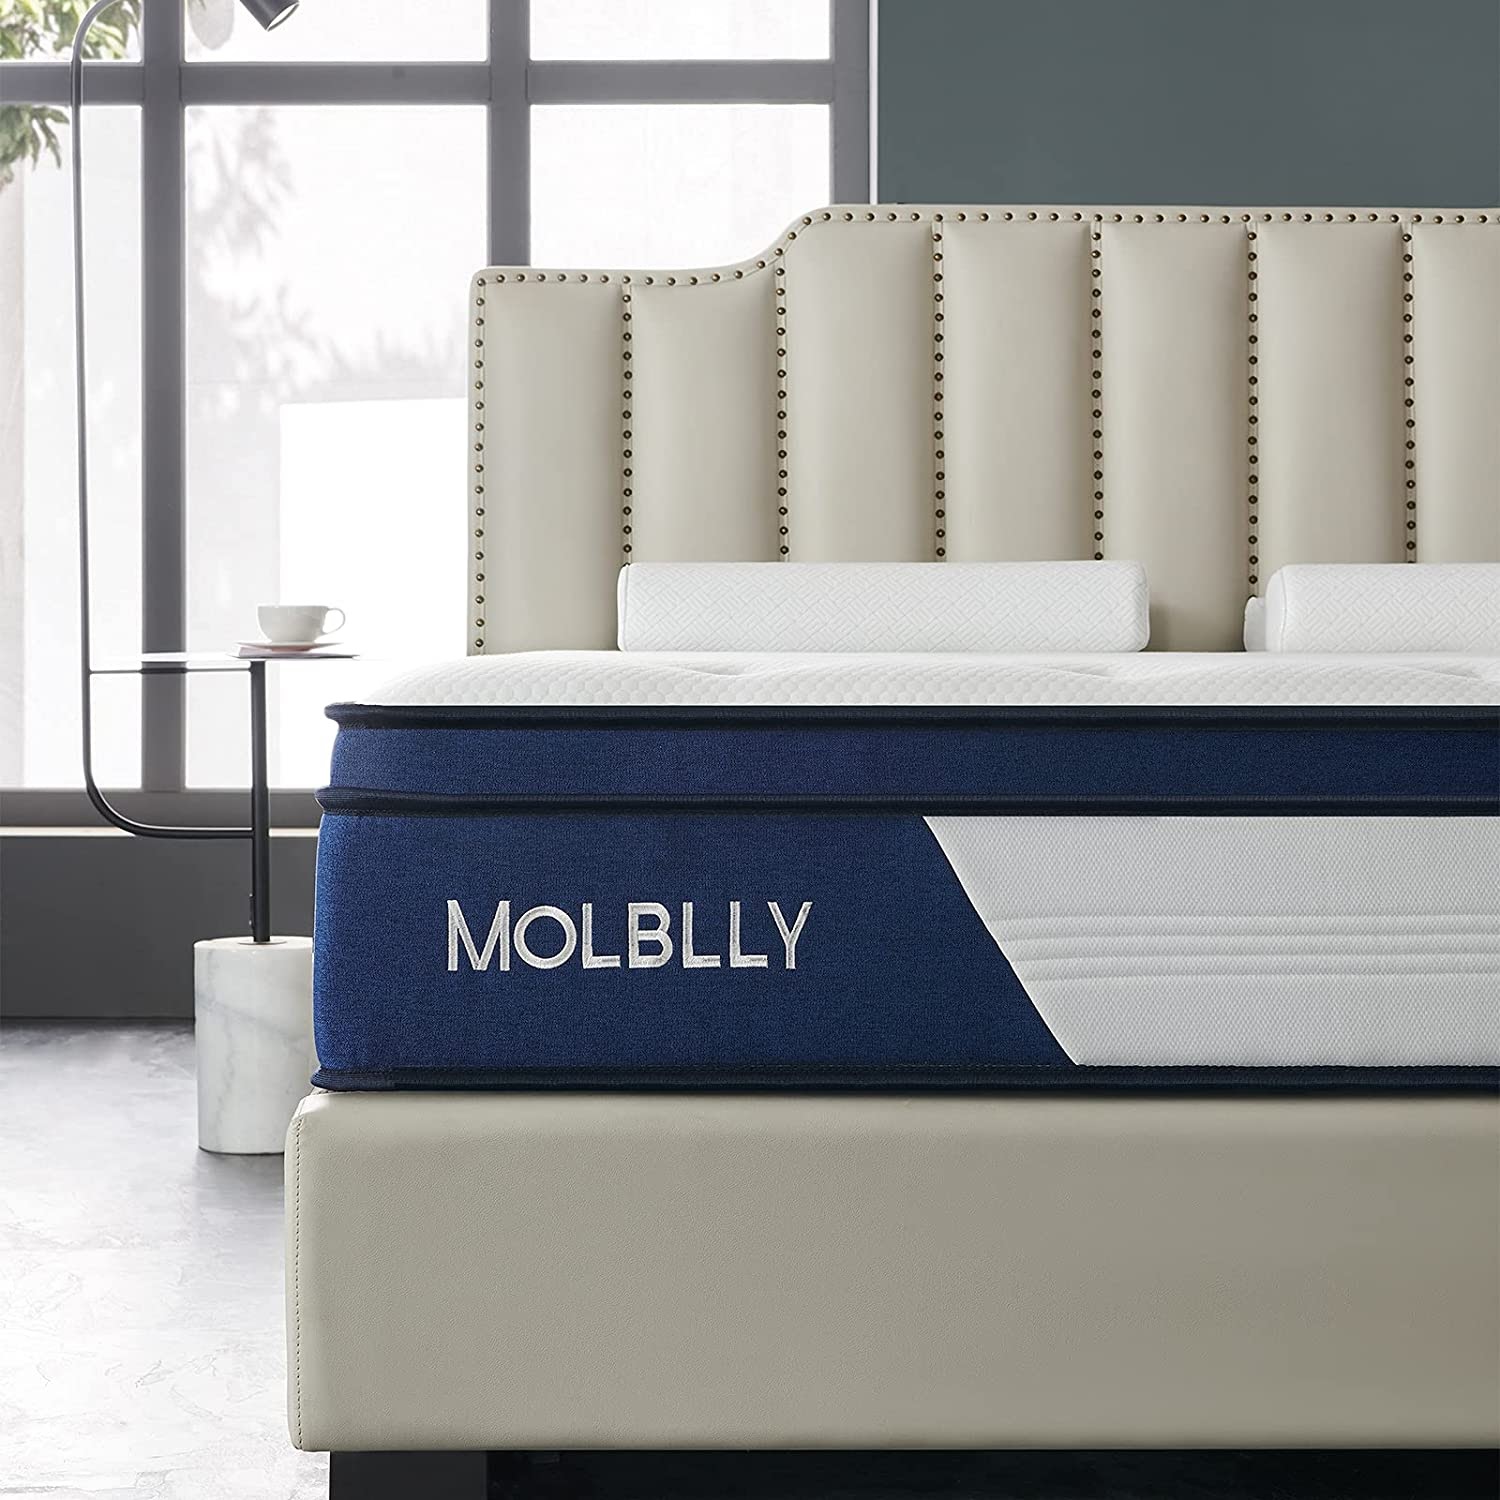 A regular mattress like this spring mattress can be comfortable enough for a person that does not have special medical or physical conditions. 